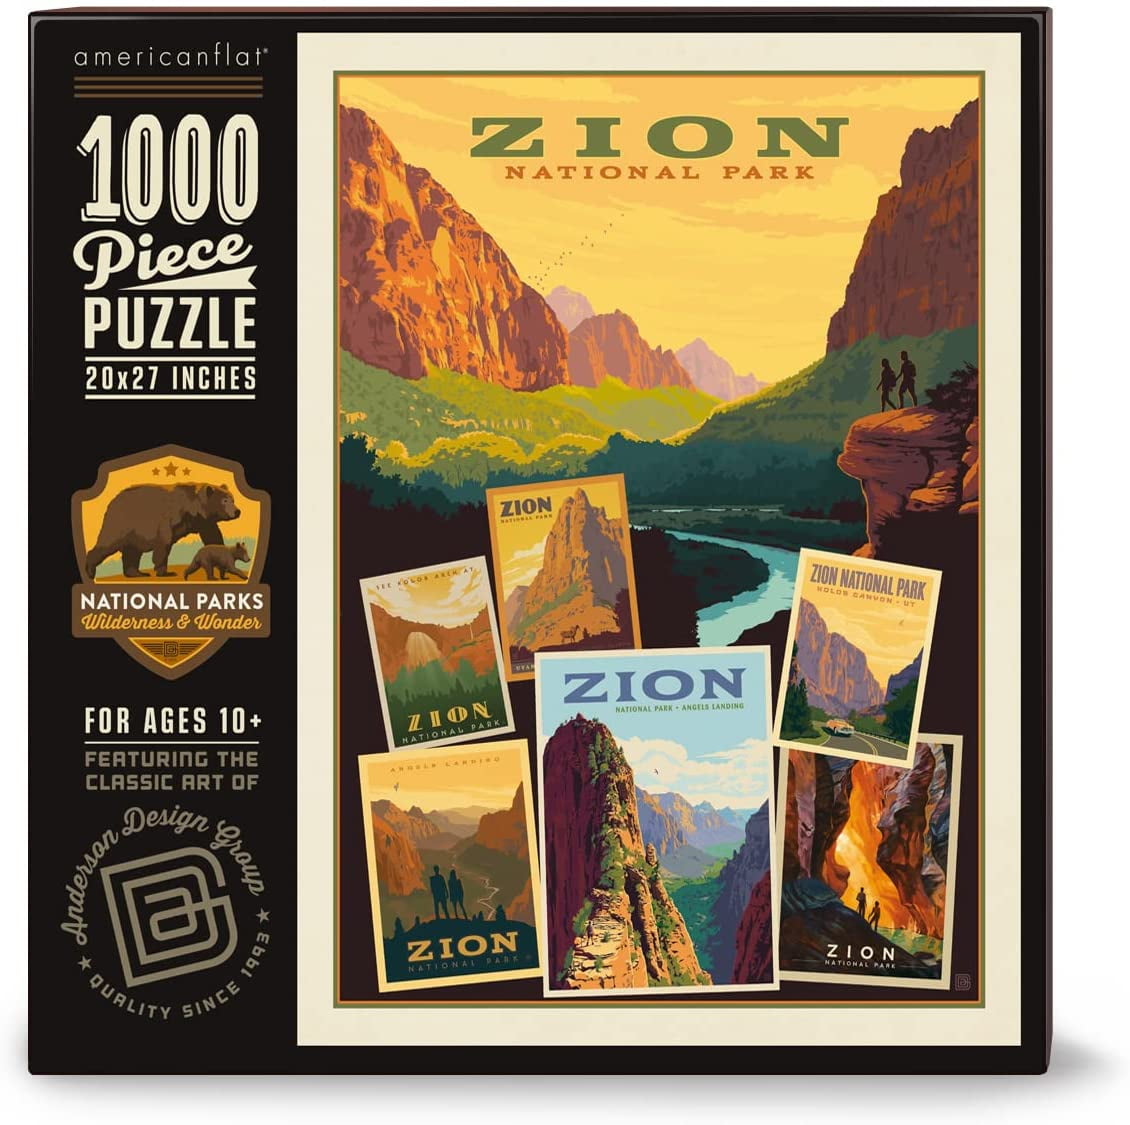 Enovoe Puzzles for Adults 1000 Pieces - Featuring Zion National Park -  Challenging and Educational Masterpieces Puzzle for Kids - Large, 27 x 20  